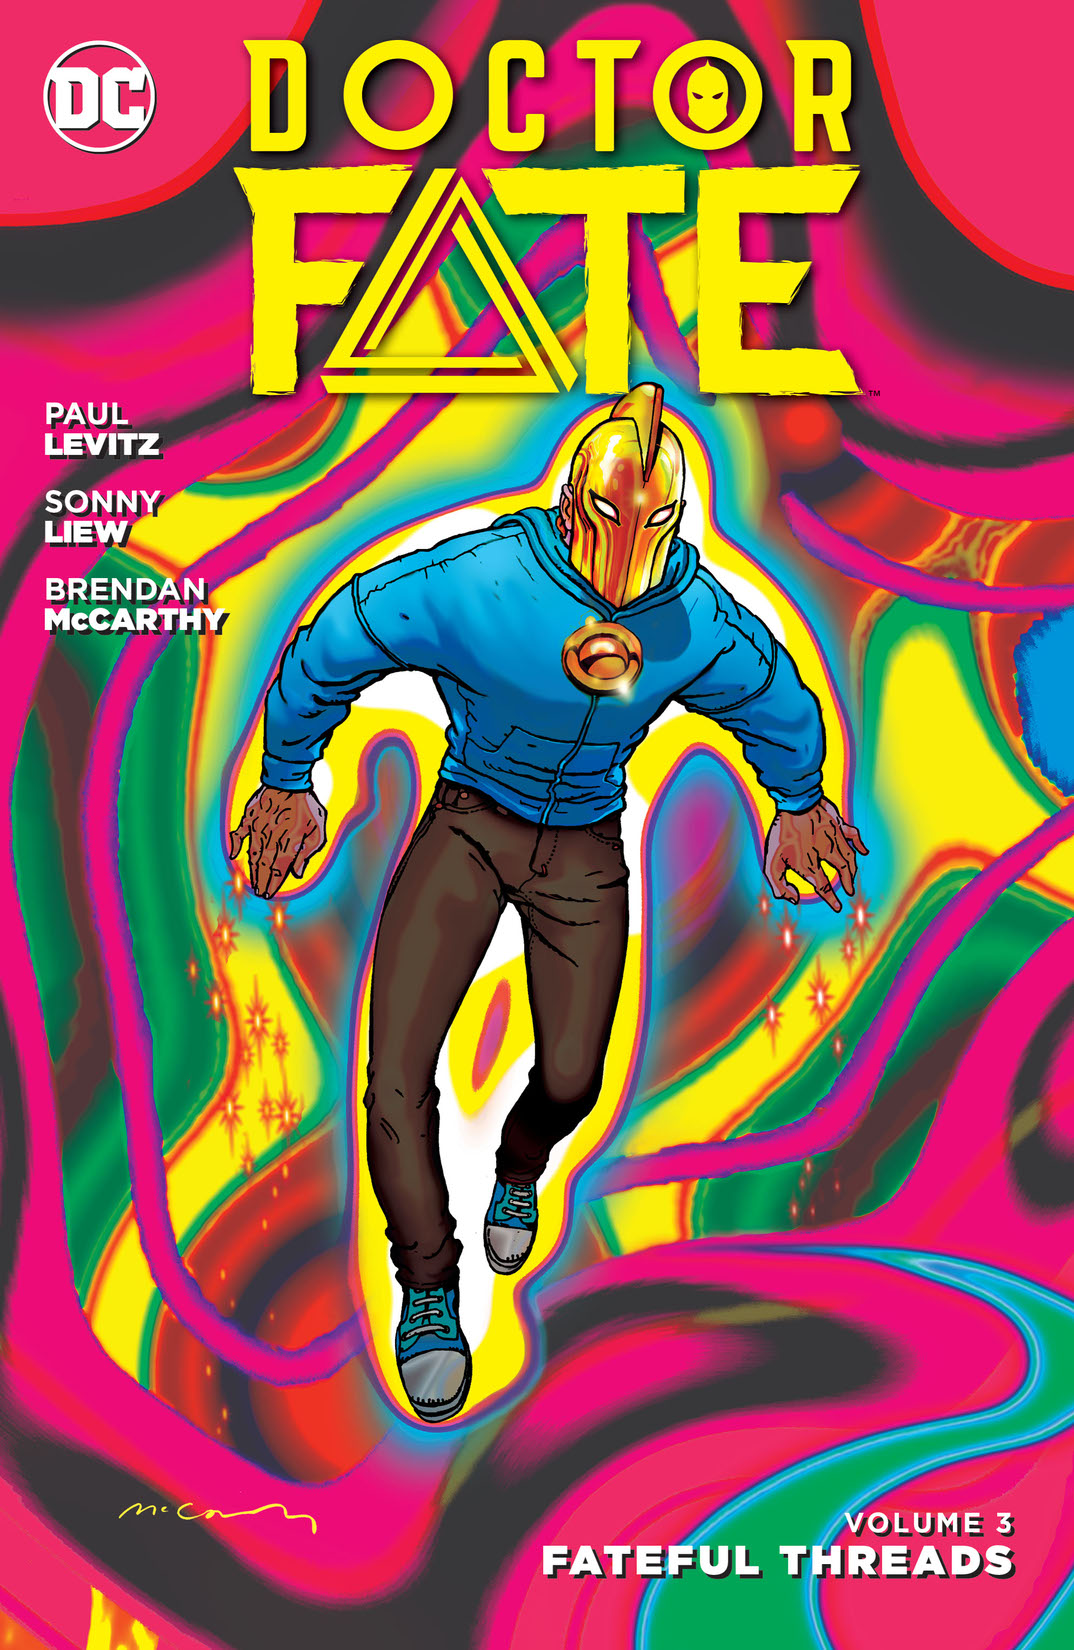 Doctor Fate Vol. 3: Fateful Threads preview images